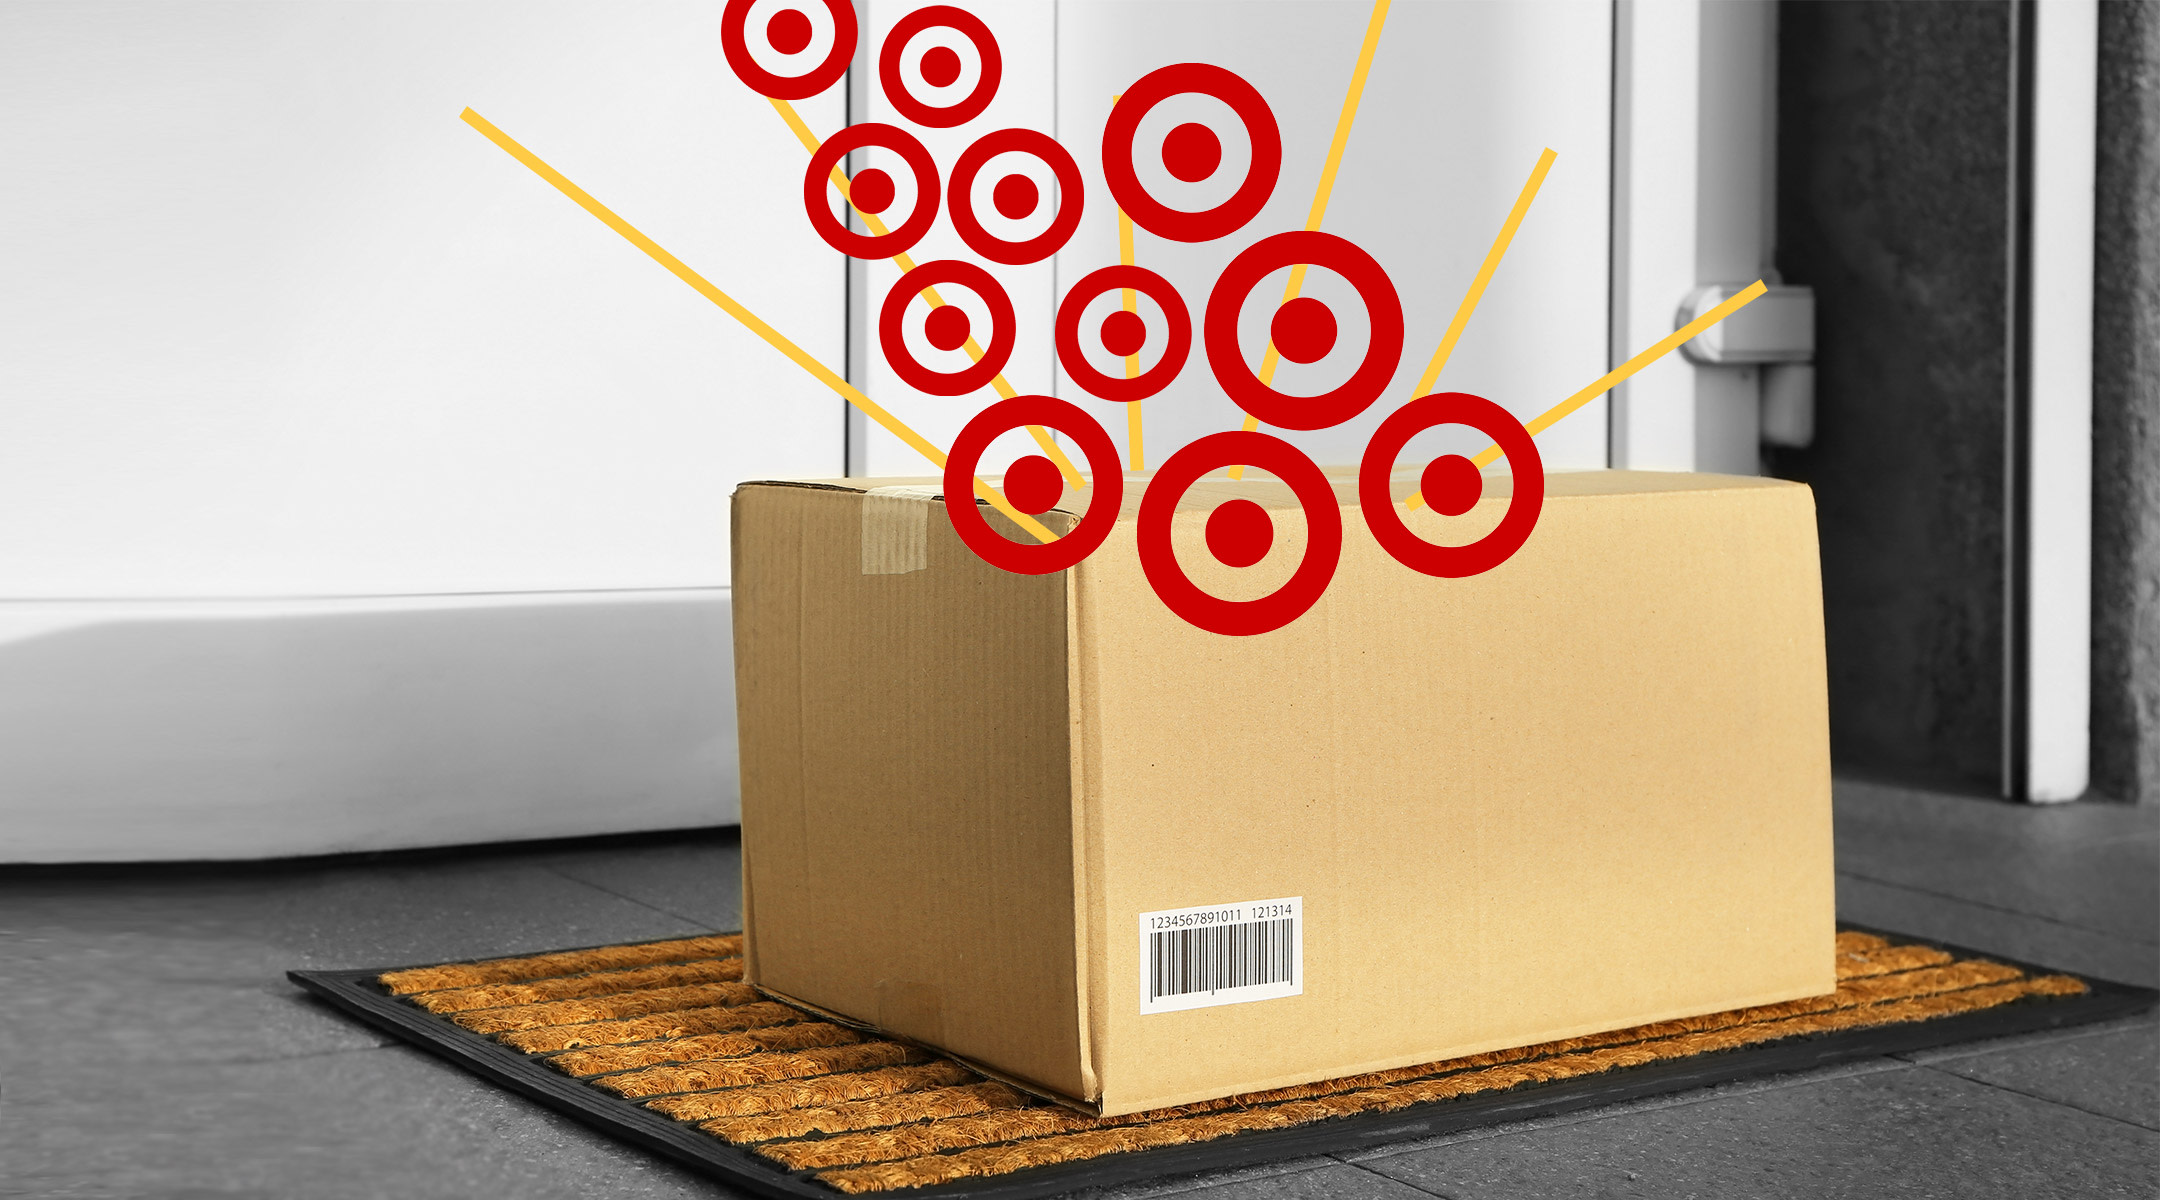 target now offers same day delivery, box with target logos sitting on doorstep